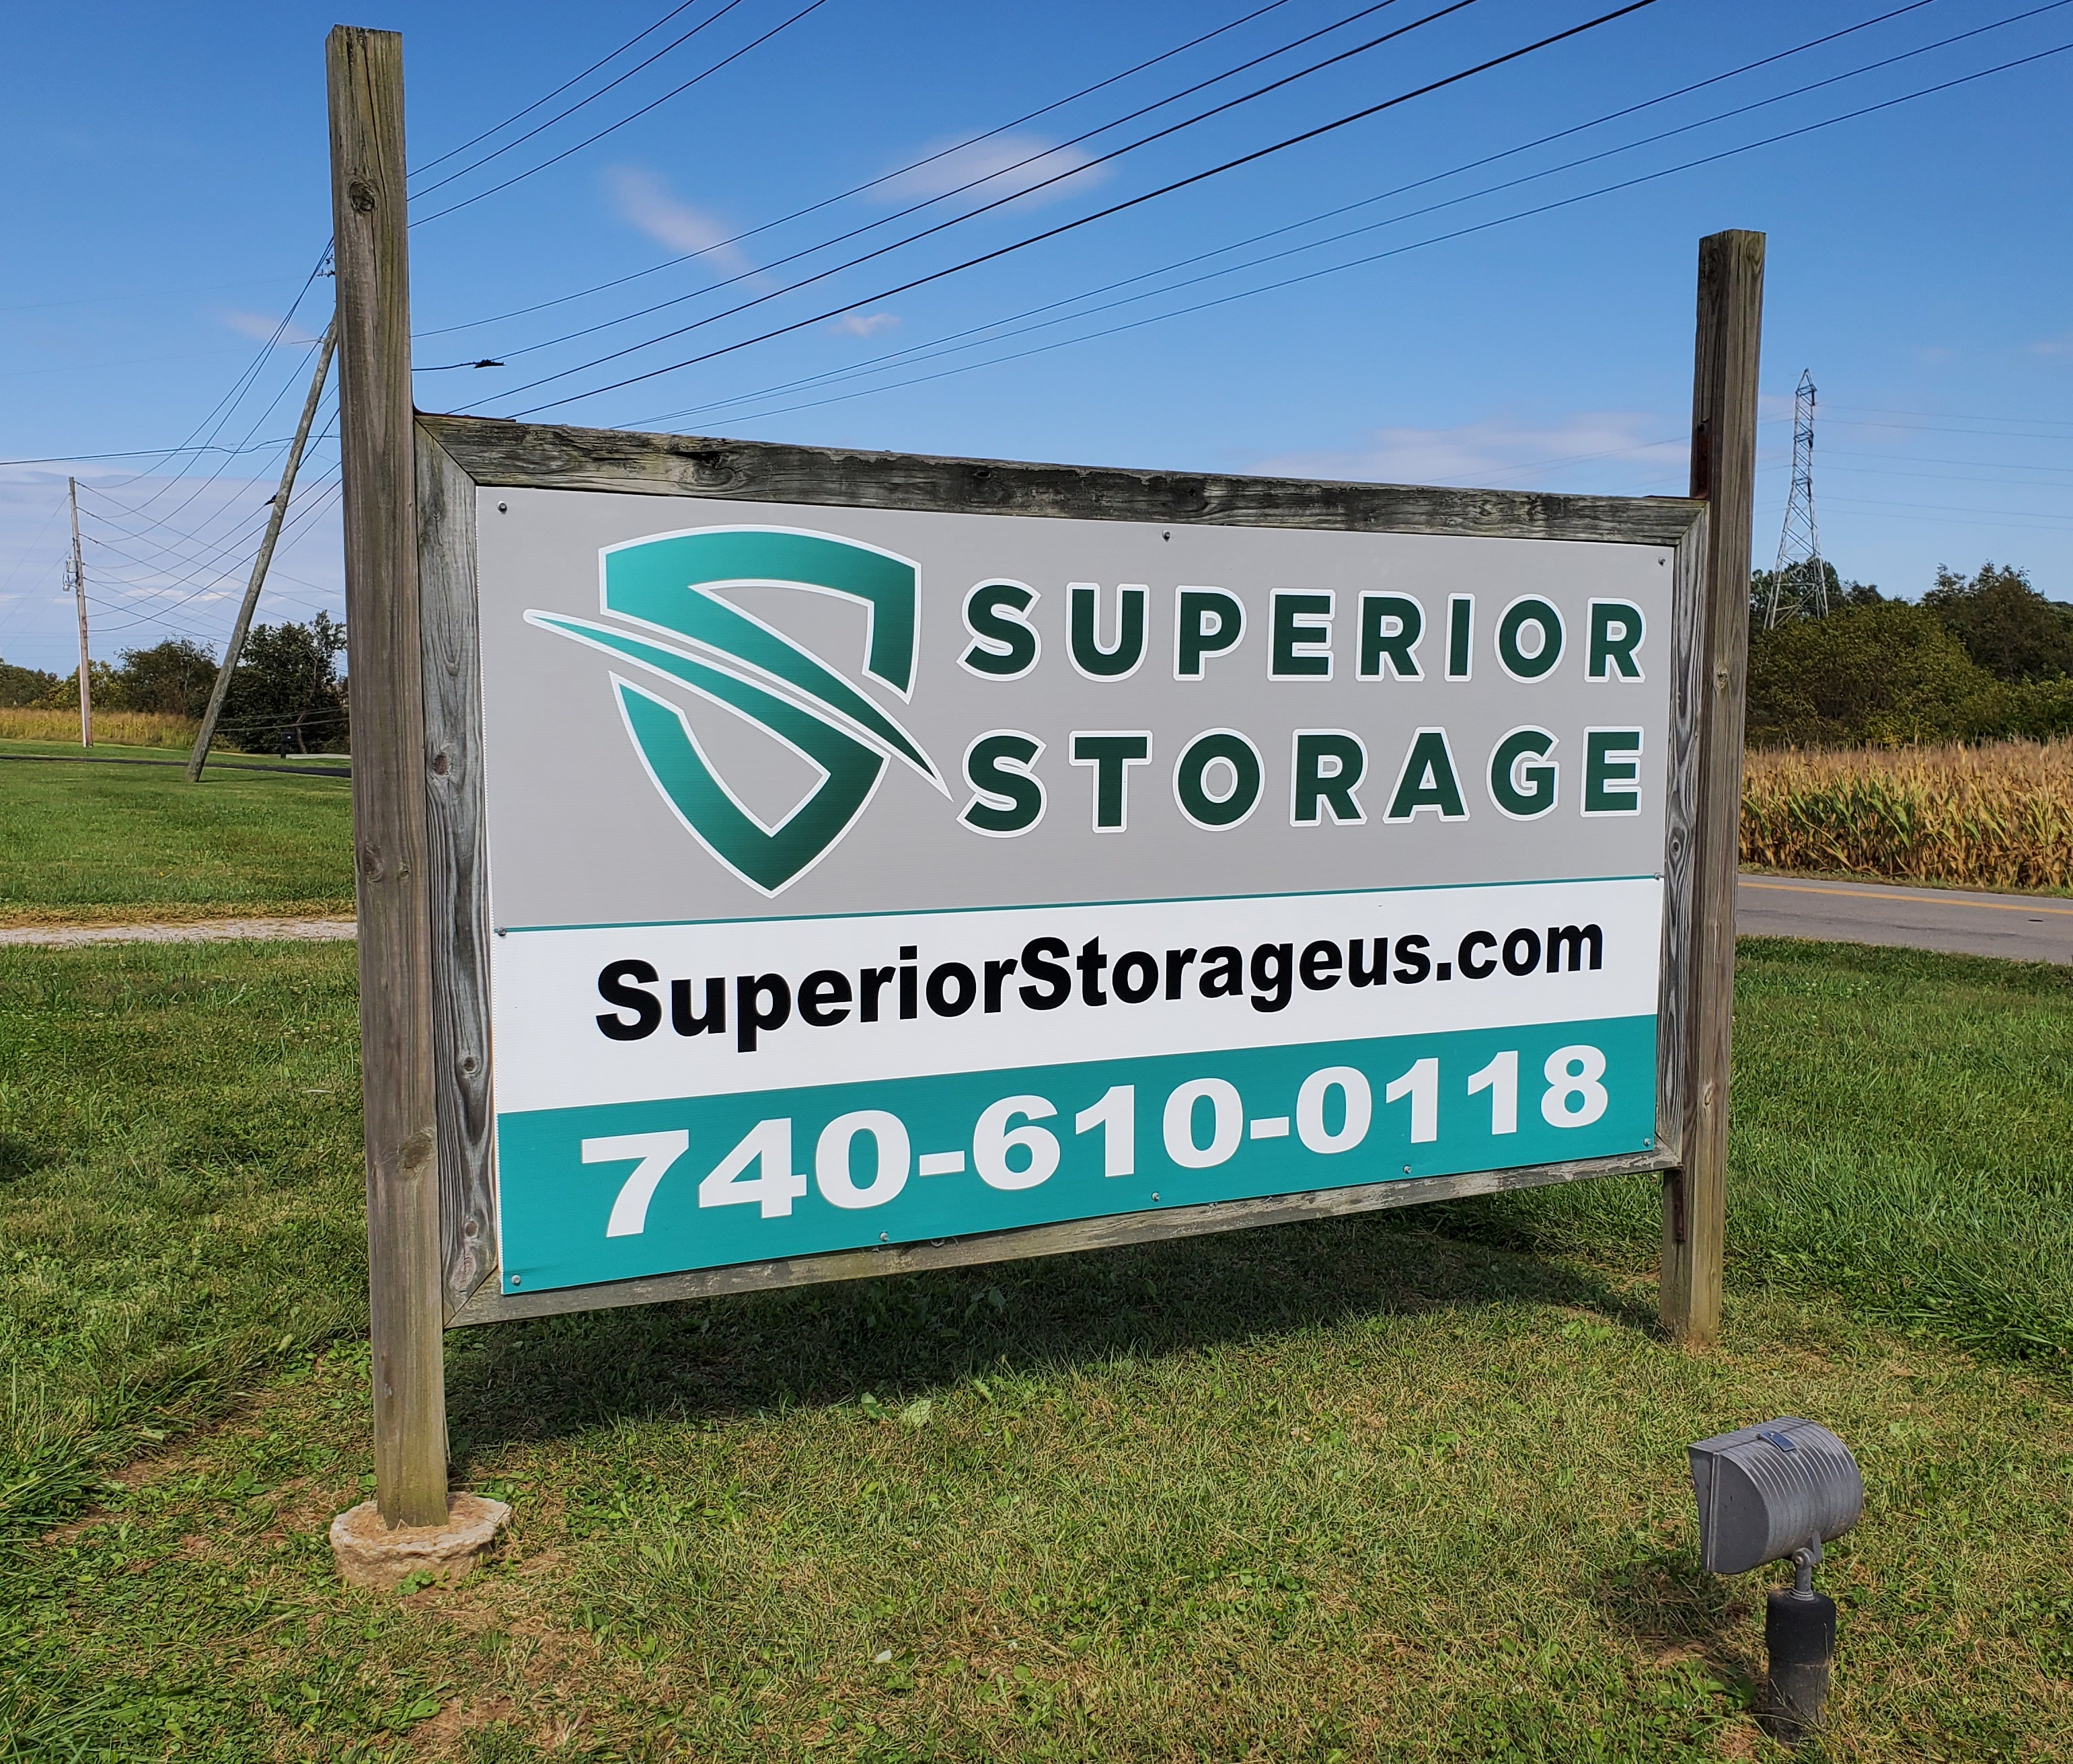 Image of the prominently displayed Superior Storage sign at the Wheelersburg, OH location, featuring bold lettering against a contrasting background, clearly visible from the road.